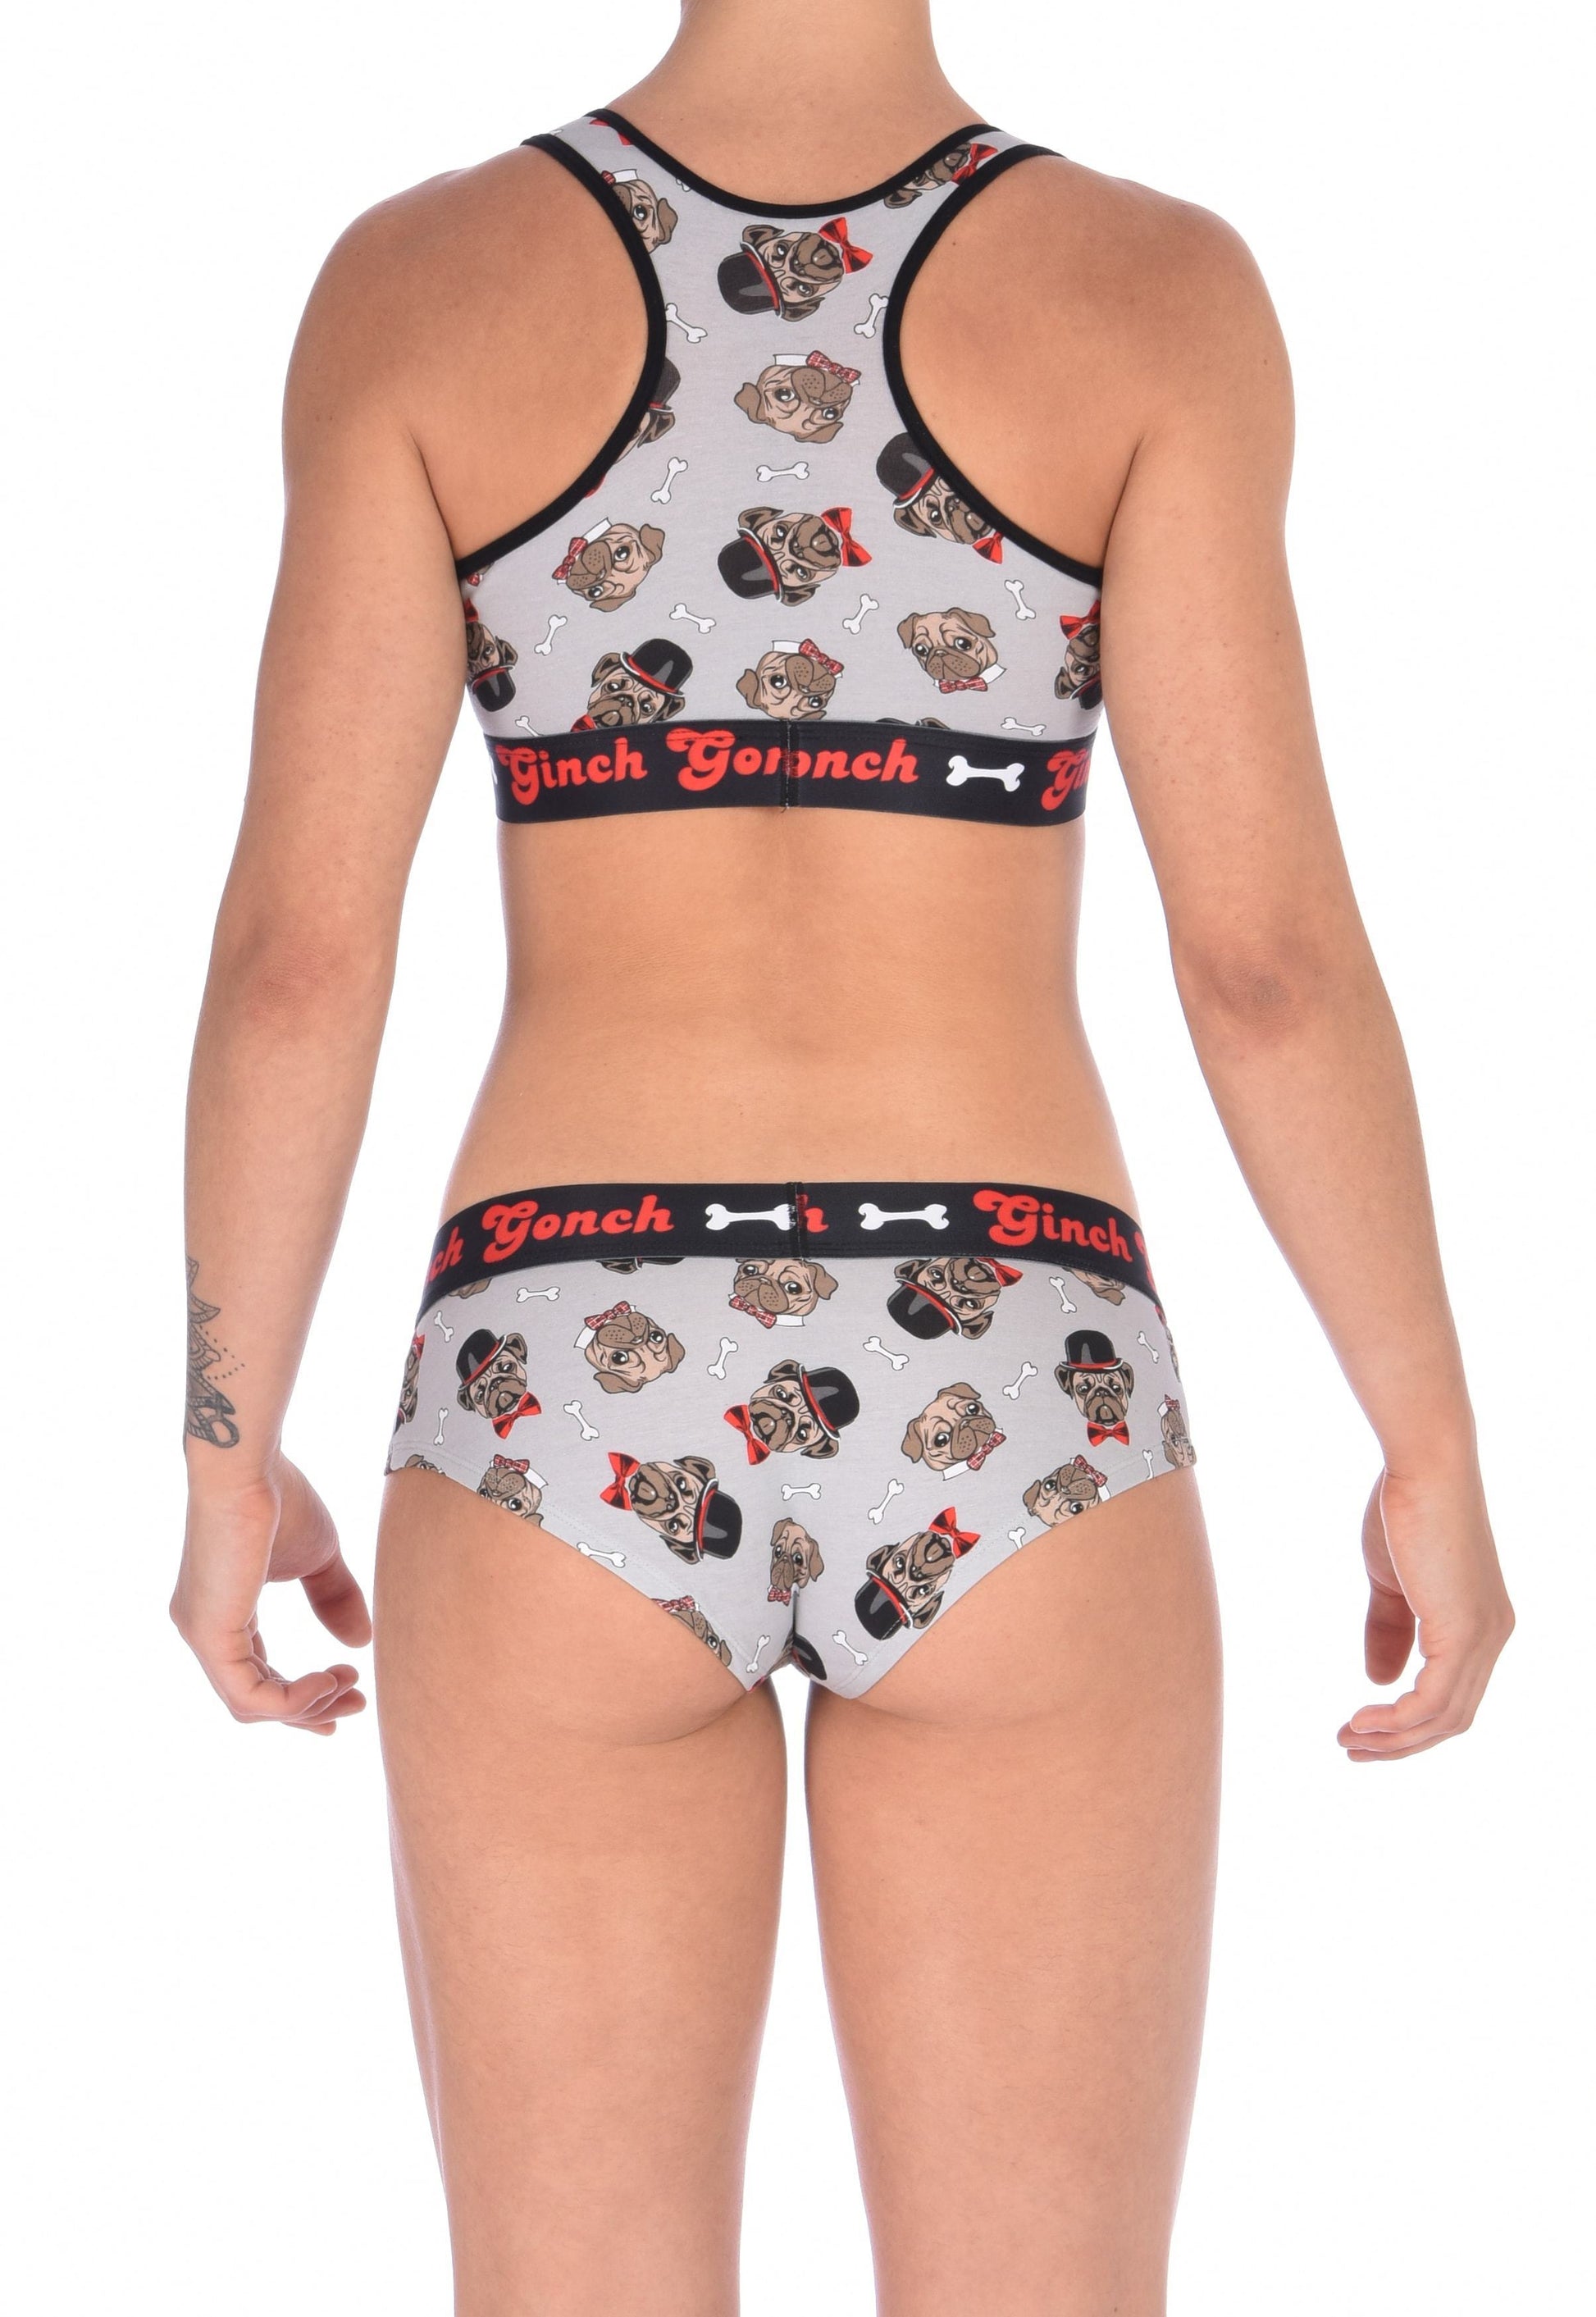 GG Ginch Gonch Pug Life boy cut brief cheeky gogo - women's Underwear grey background with pugs with top hats and bow ties and bones. Black trim with black printed waistband back. Shown with matching sports bra